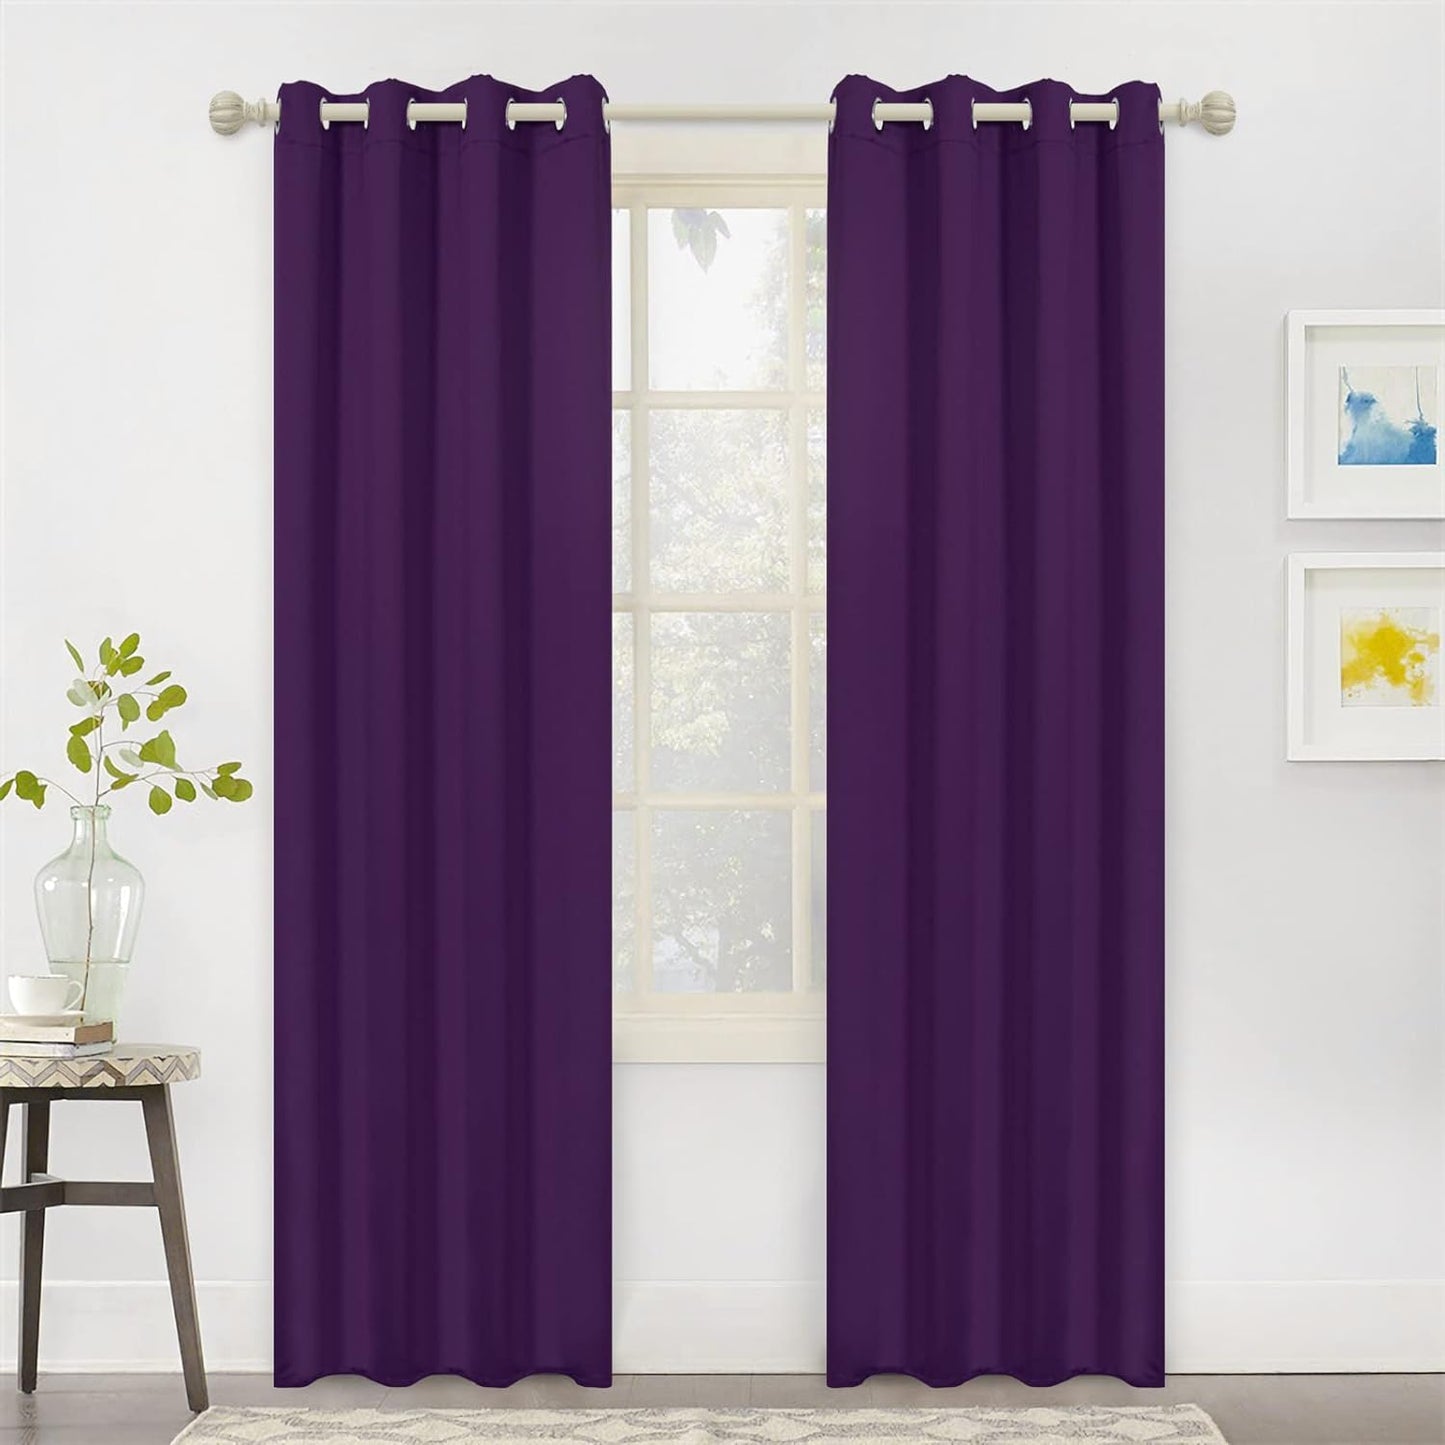 MYSKY HOME Black Curtains for Bedroom 90 Inch Long Blackout Curtains for Living Room 2 Panels Thermal Insulated Grommet Room Darkening Curtains Privacy Protect Window Drapes, 52 X 90 Inches, Black  MYSKY HOME Purple 52W X 84L 